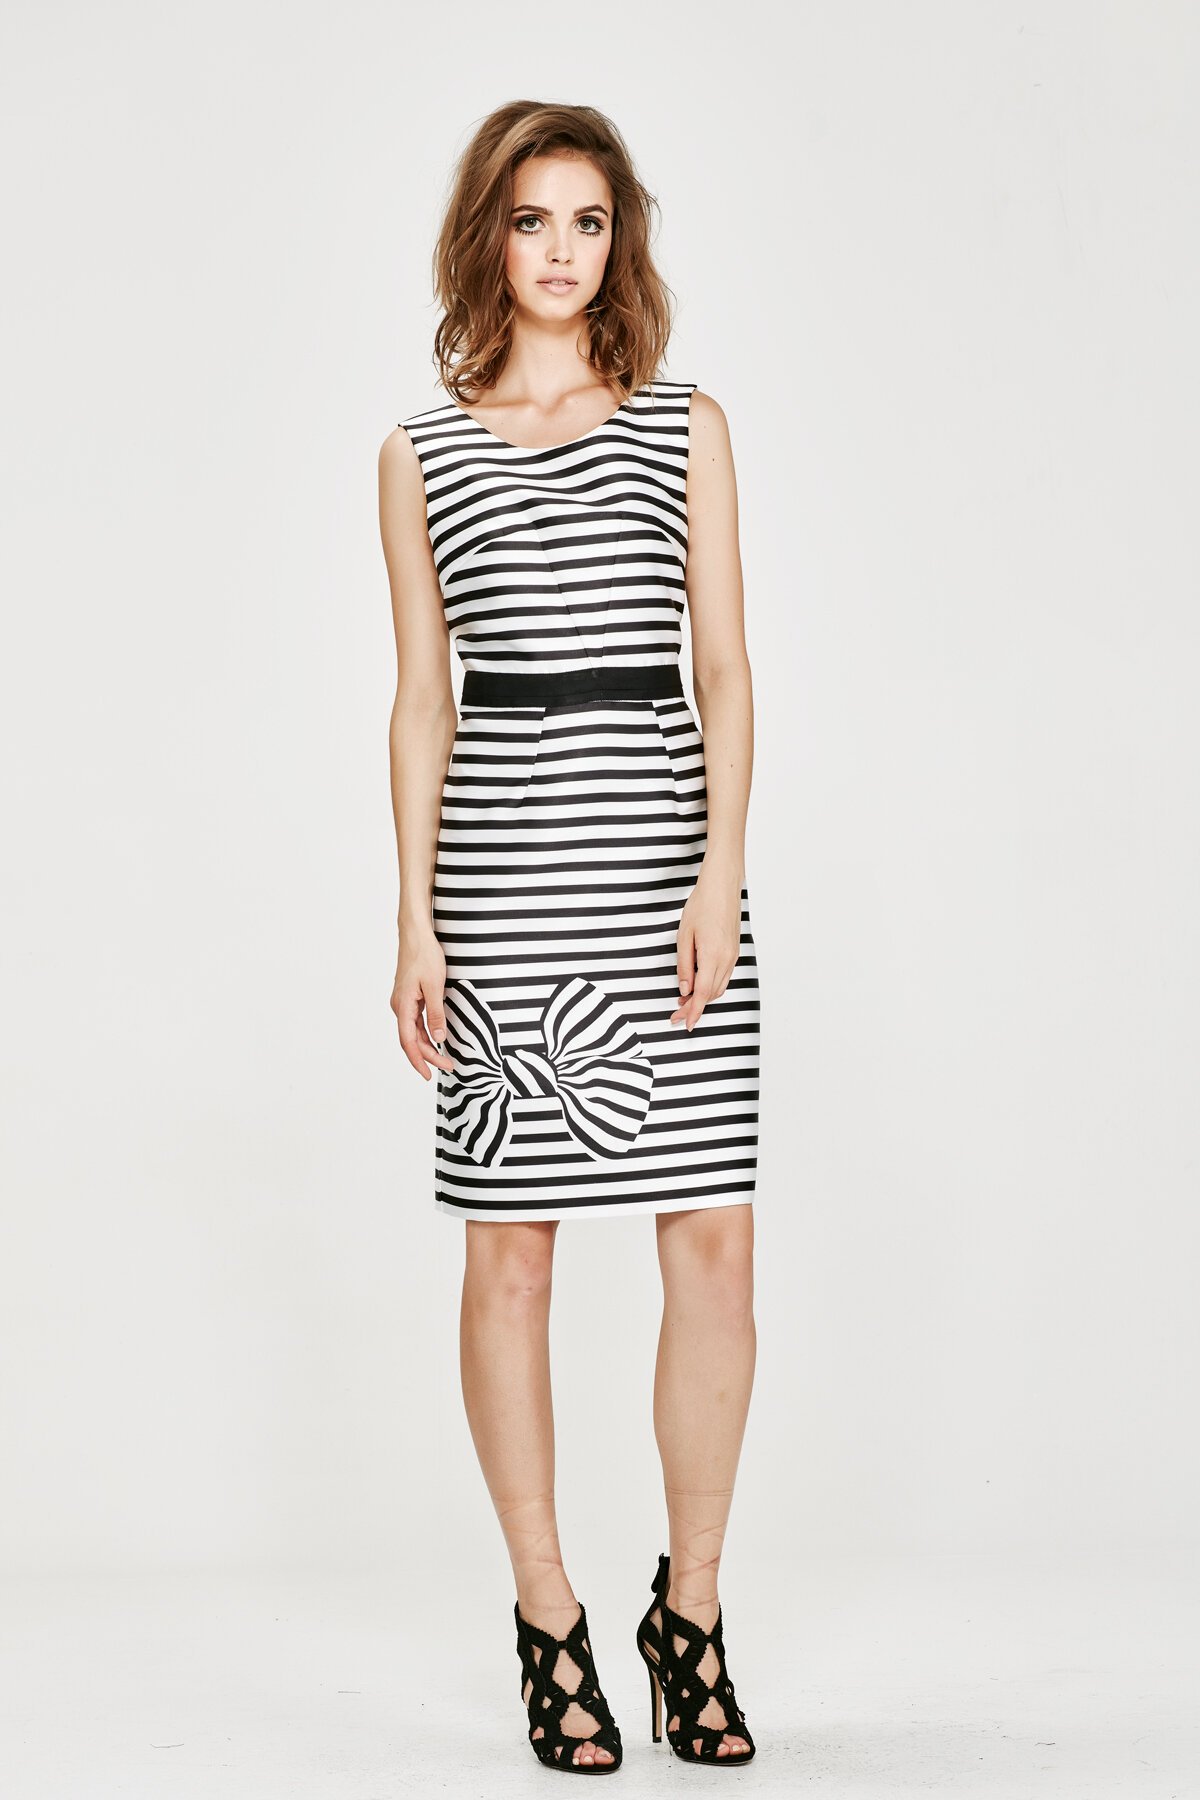 TROUBLE AND STRIPE Dress - The Outlet-New In : Trelise Cooper Online ...